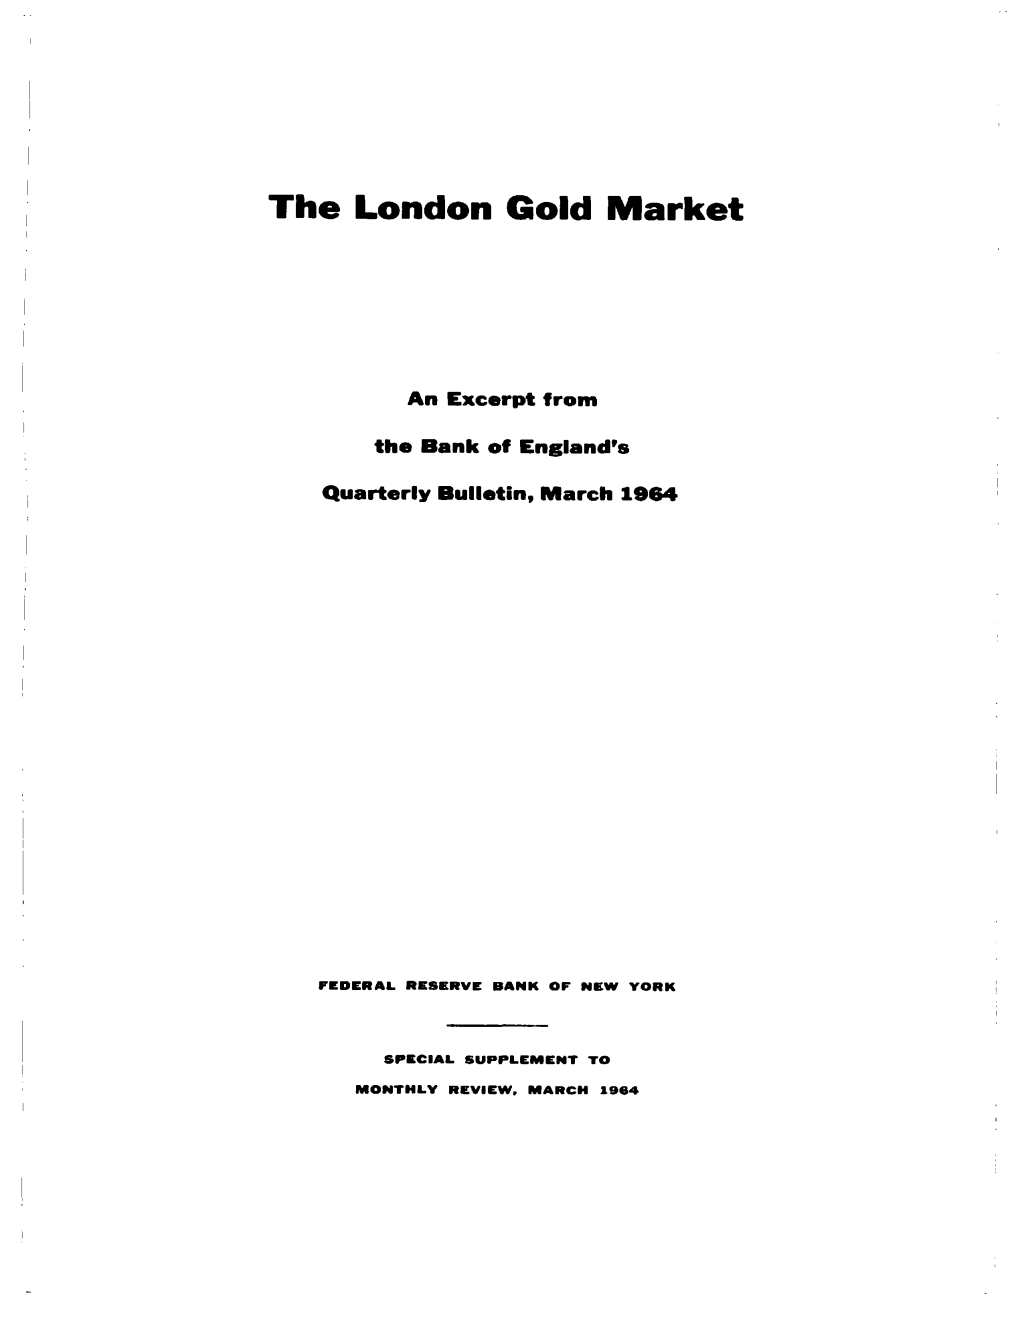 The London Gold Market — Excerpt from the Bank of England's